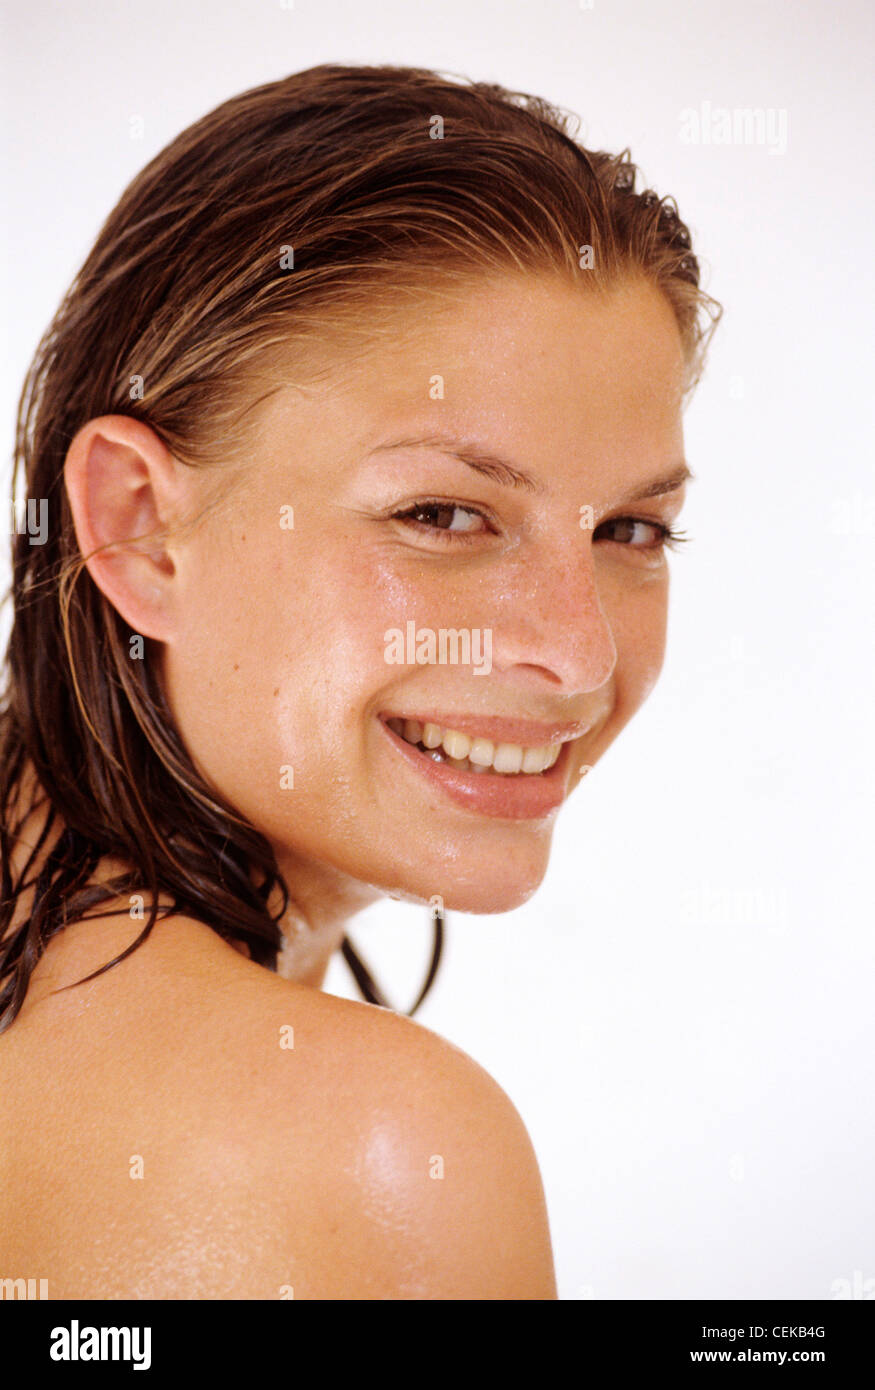 Female Long Wet Brunette Hair Droplets Of Water On Face Looking Back Over Shoulder To Camera